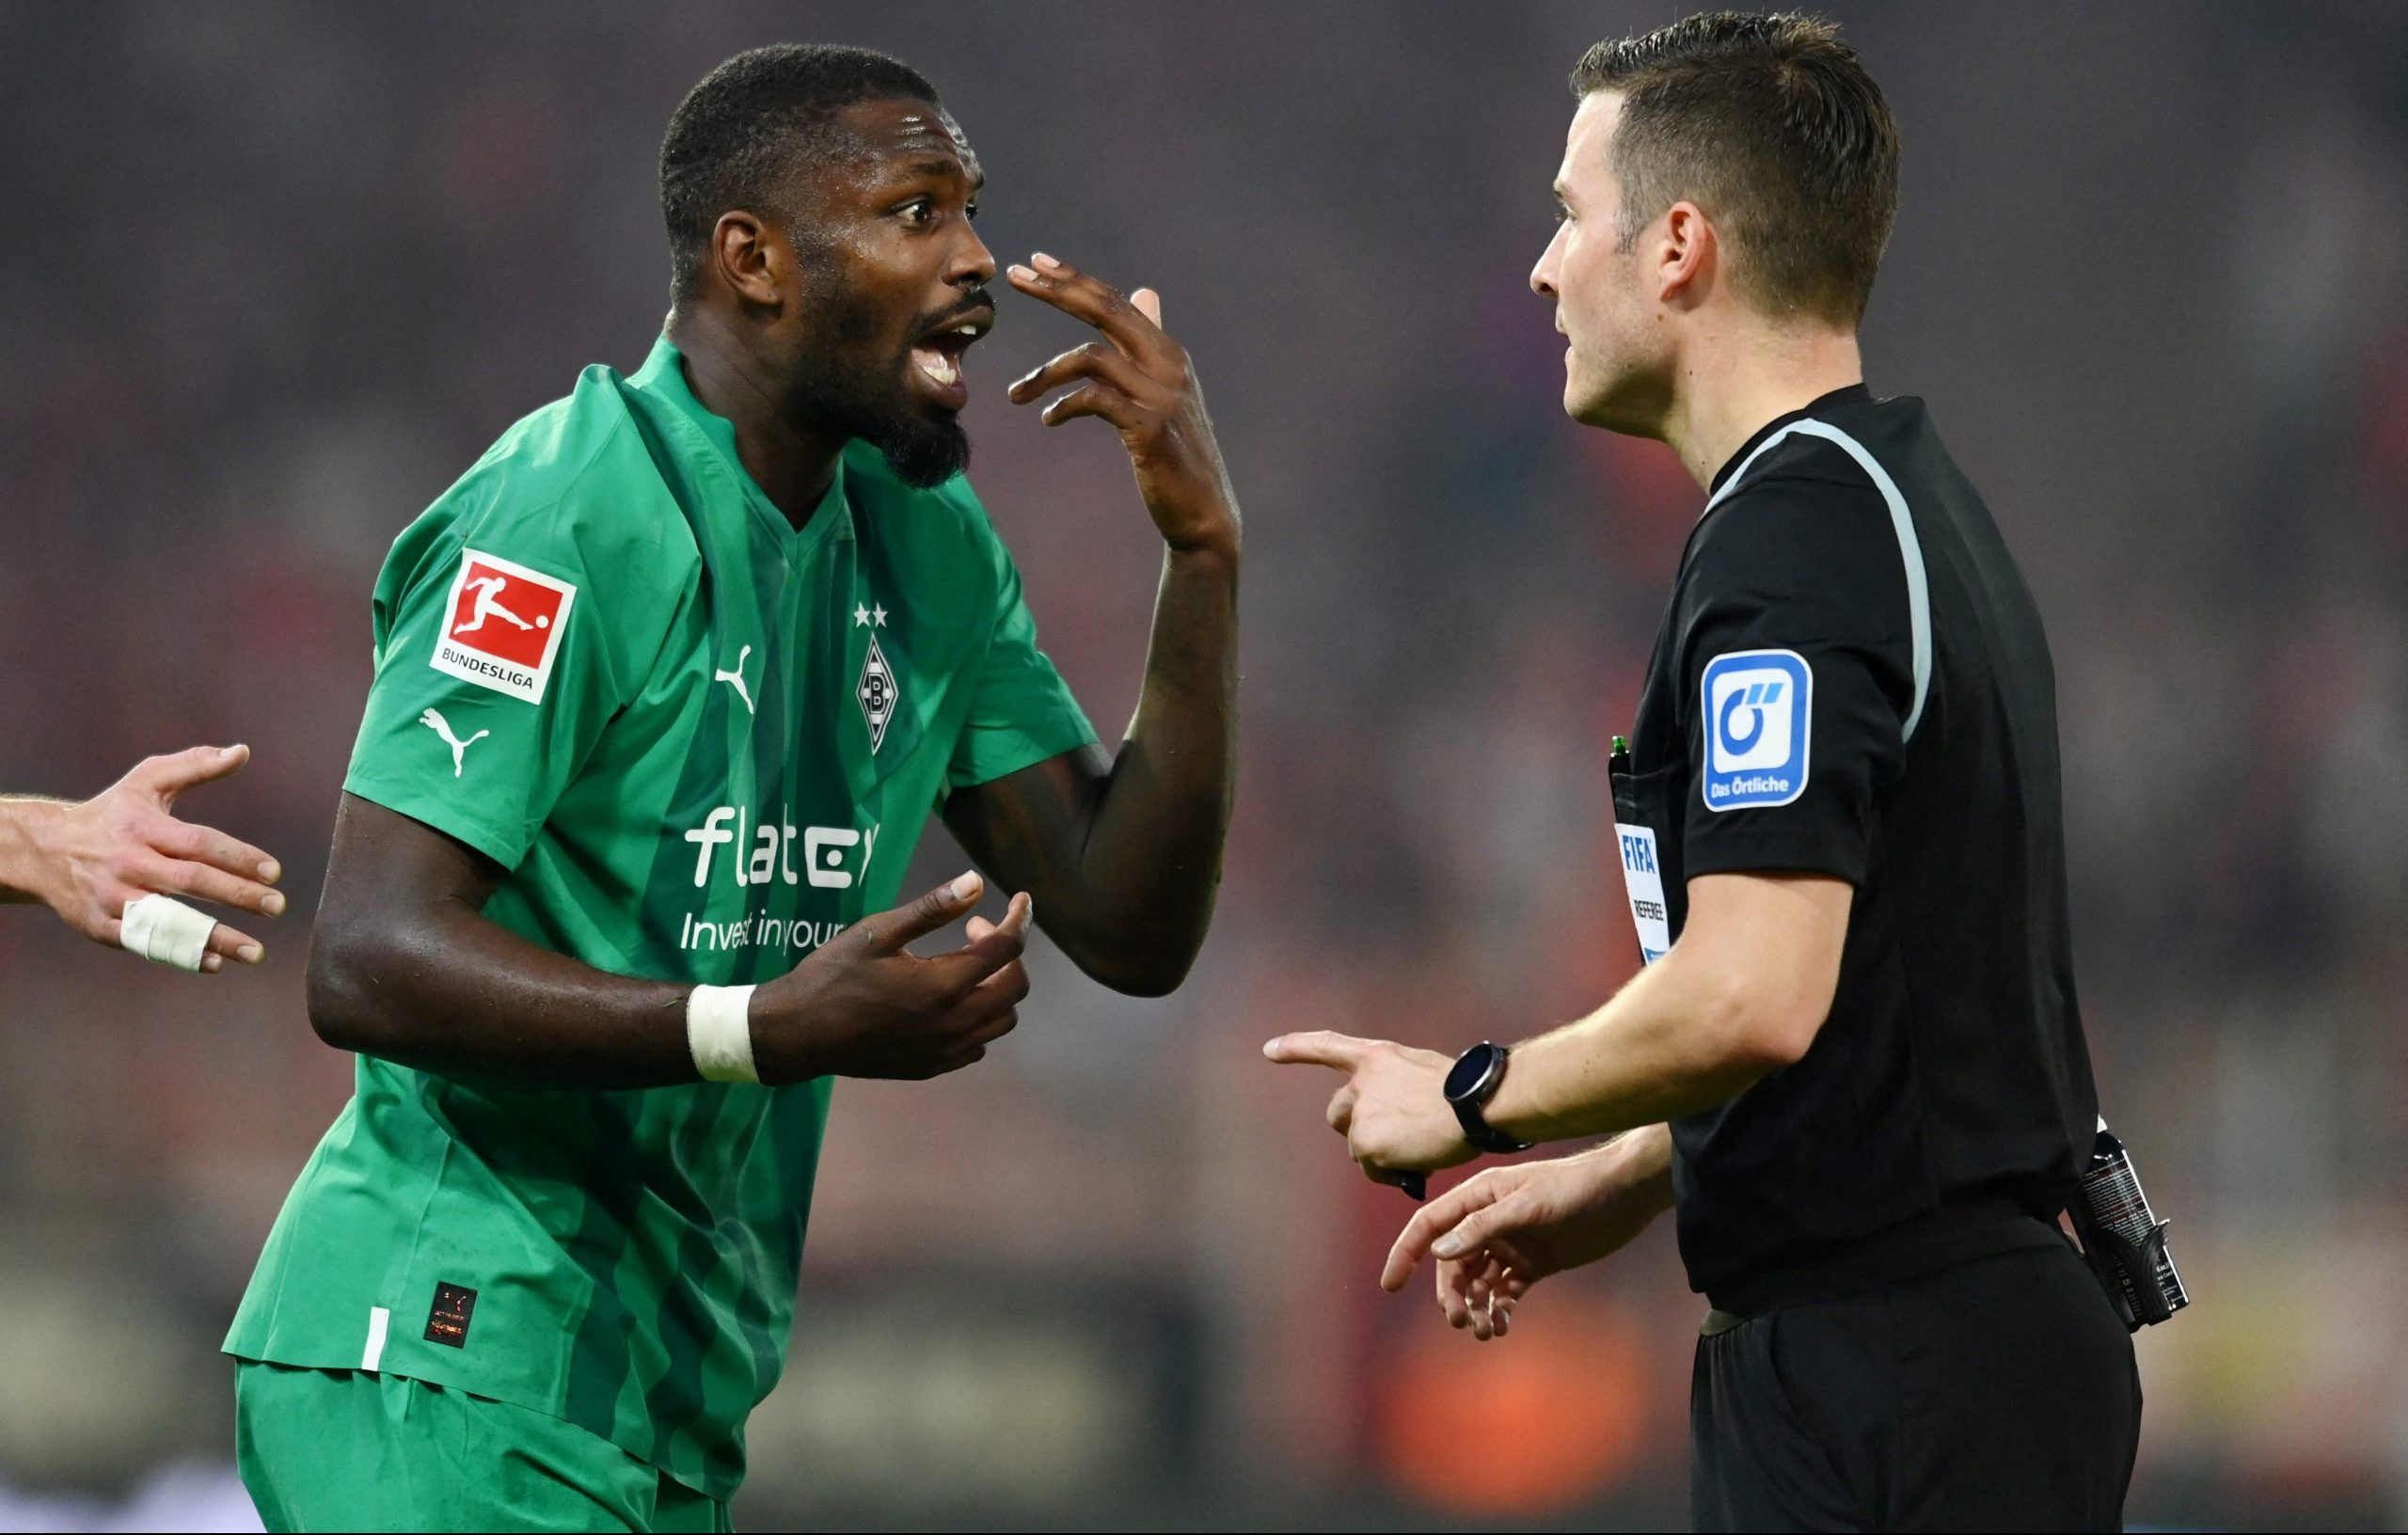 Soccer Football - Bundesliga - 1. FC Union Berlin v Borussia Moenchengladbach - Stadion An der Alten Forsterei, Berlin, Germany - October 30, 2022 Borussia Moenchengladbach's Marcus Thuram remonstrate with referee Harm Osmers REUTERS/Annegret Hilse DFL REGULATIONS PROHIBIT ANY USE OF PHOTOGRAPHS AS IMAGE SEQUENCES AND/OR QUASI-VIDEO.